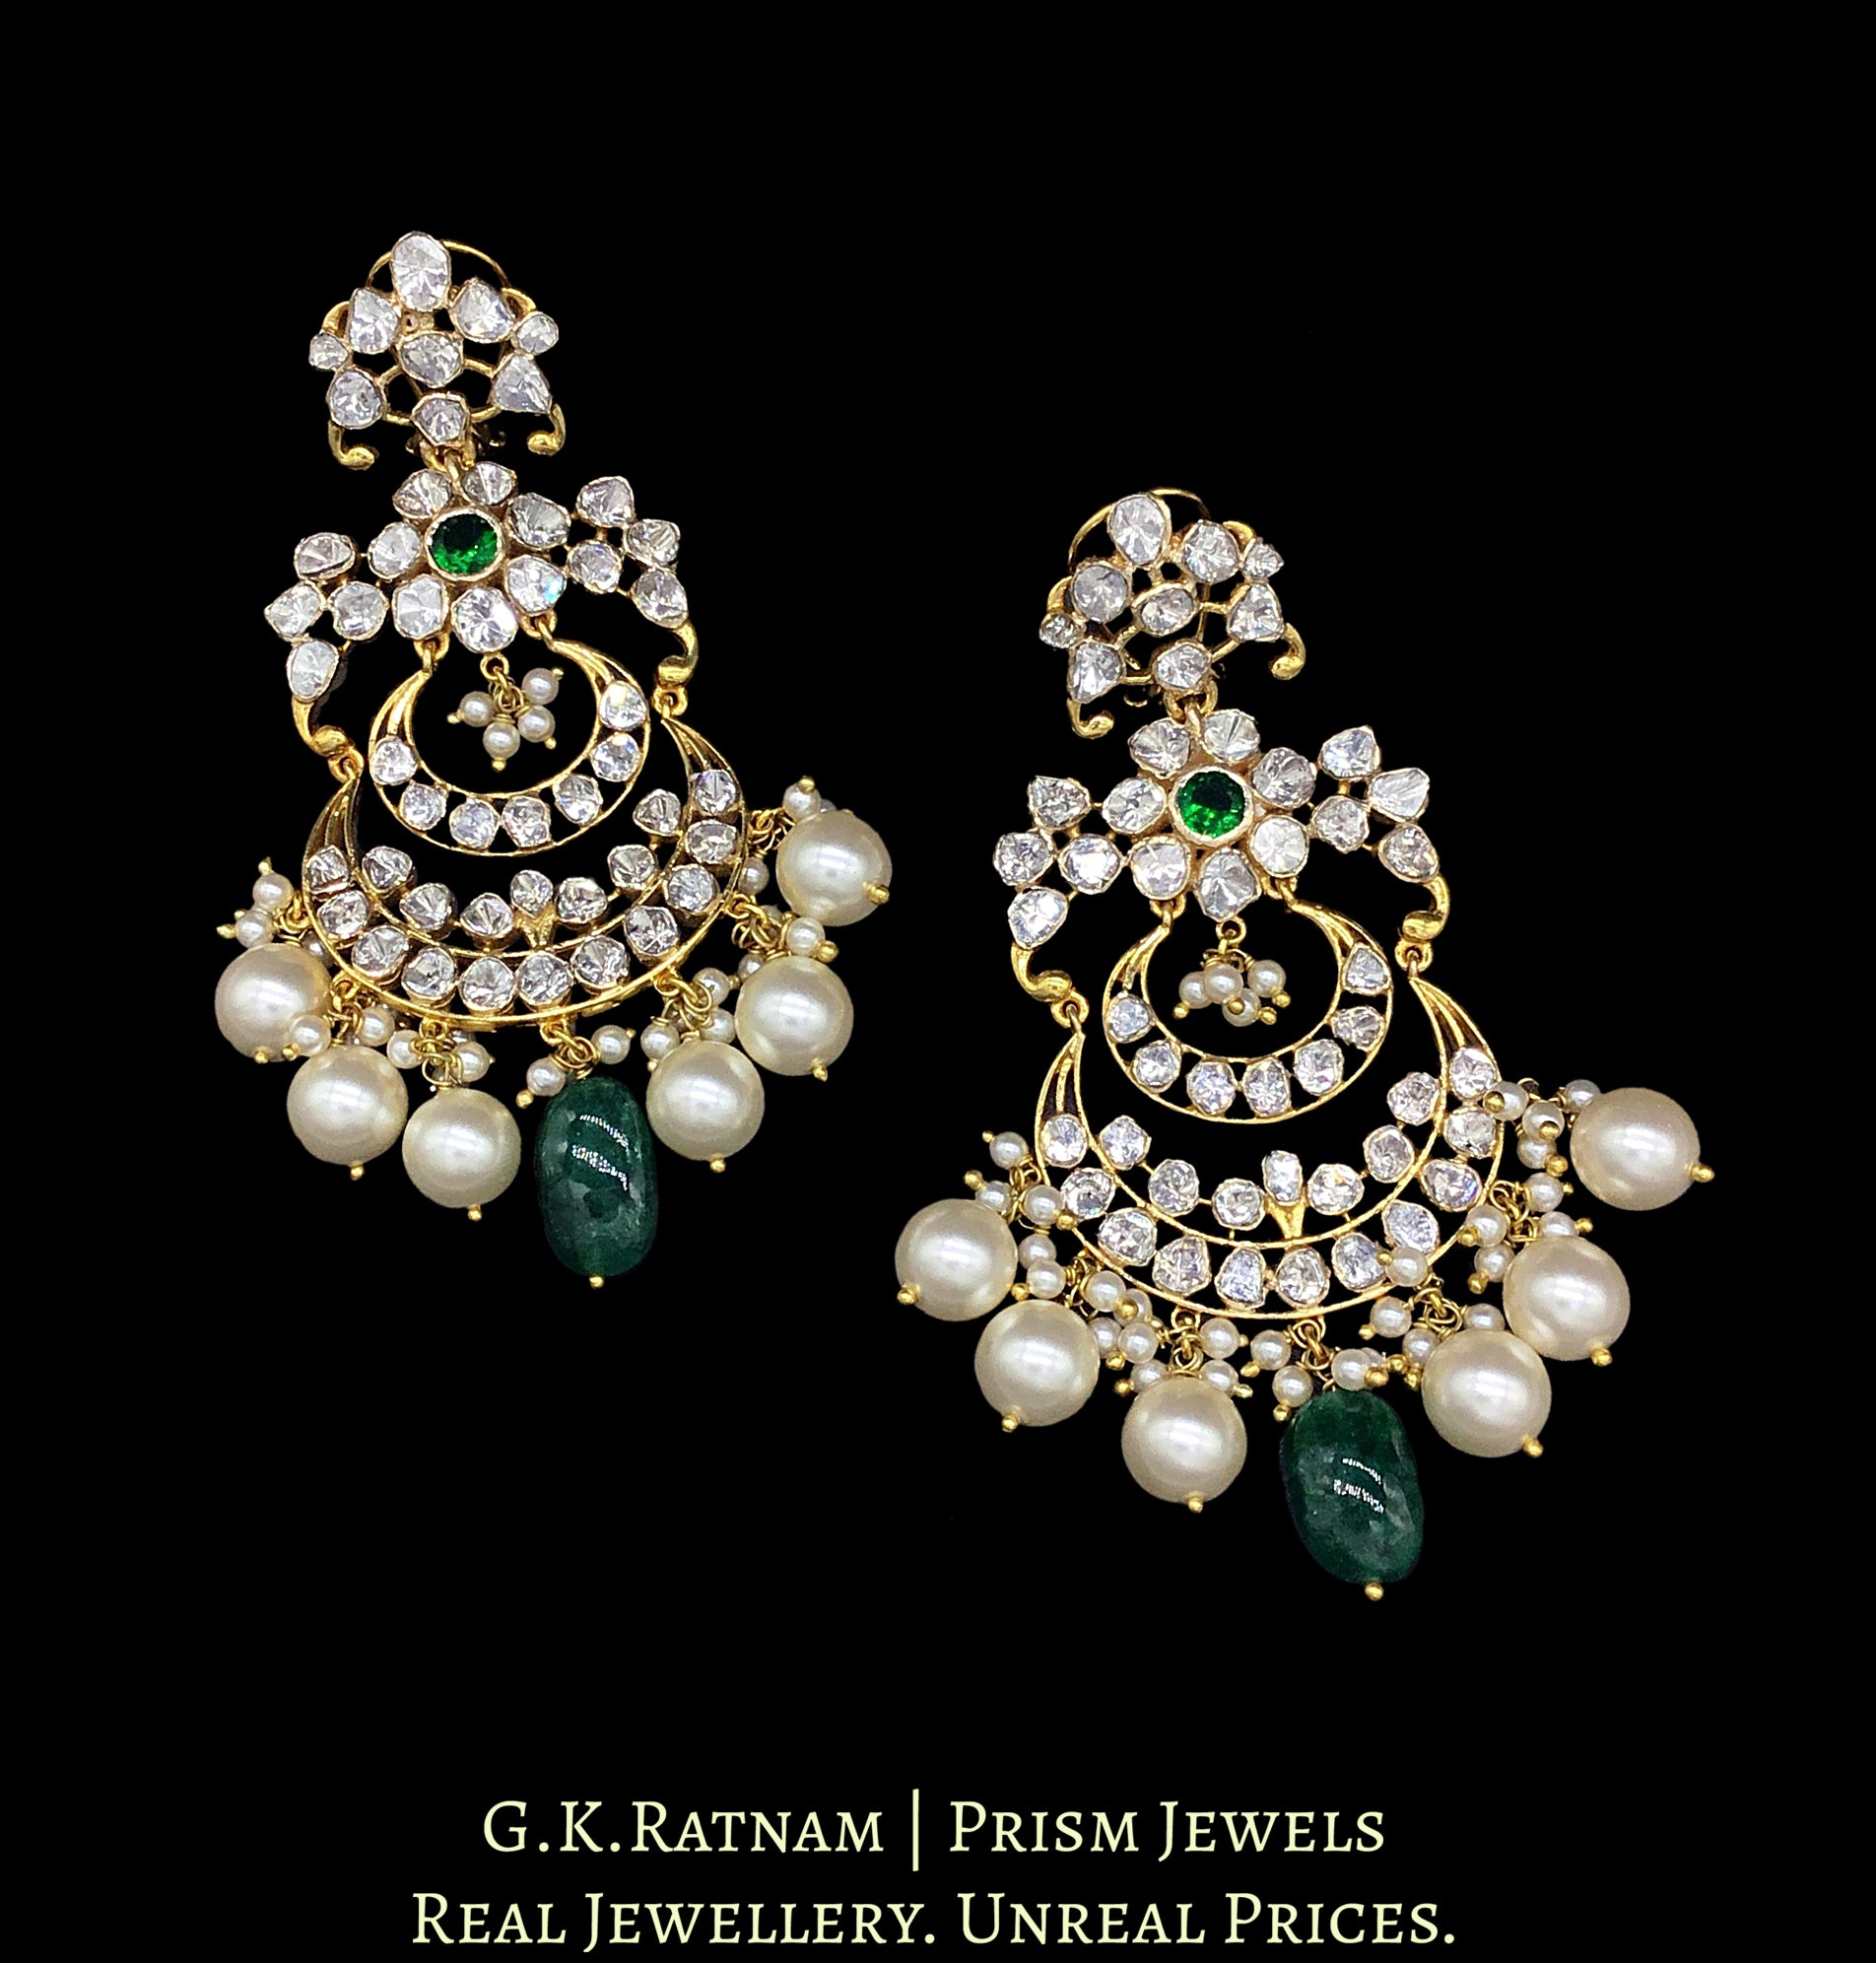 14k Gold and Diamond Polki Open Setting Chand Bali Earring Pair with Green center